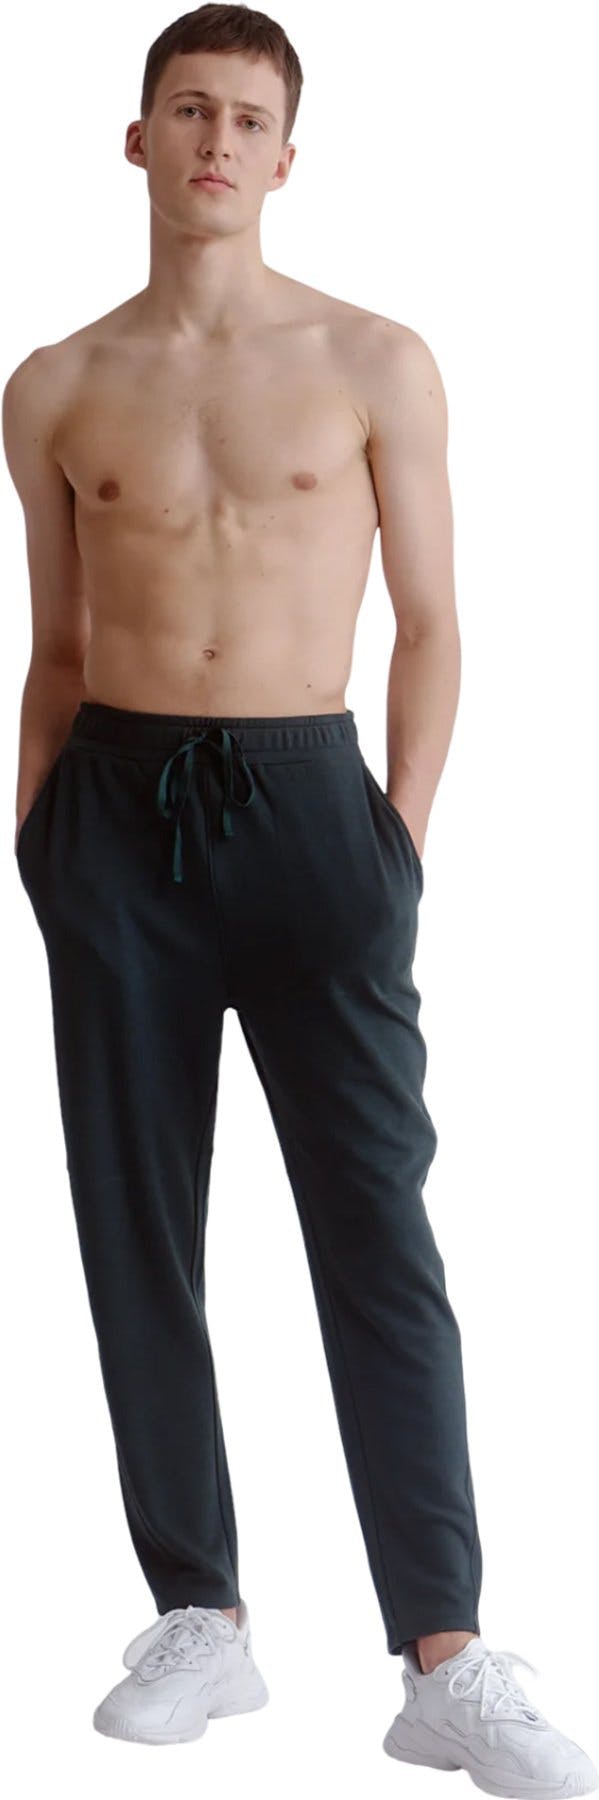 Product image for Warm Pants - Men's